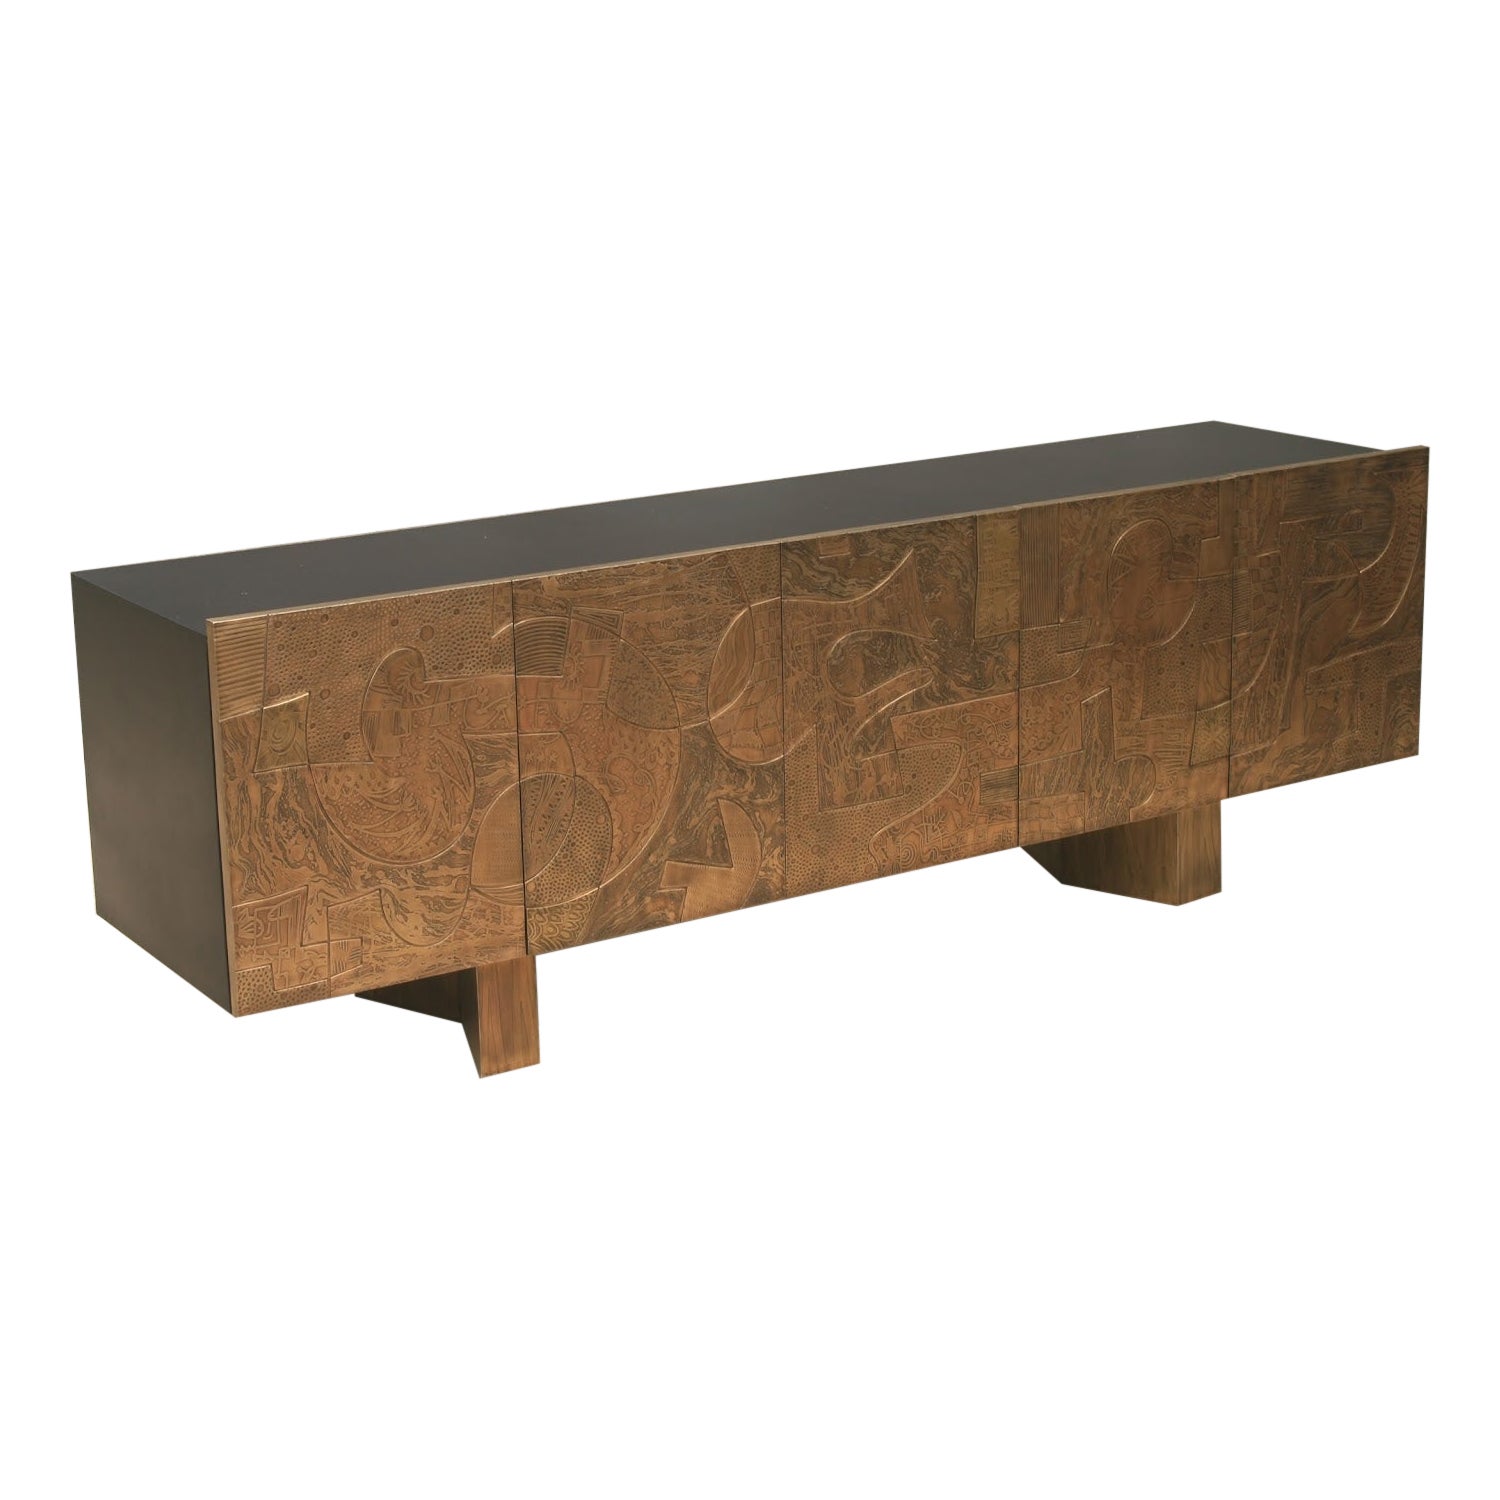 Front Plated in Acid-Etched Copper 5D Cabinet by Brutalist Be